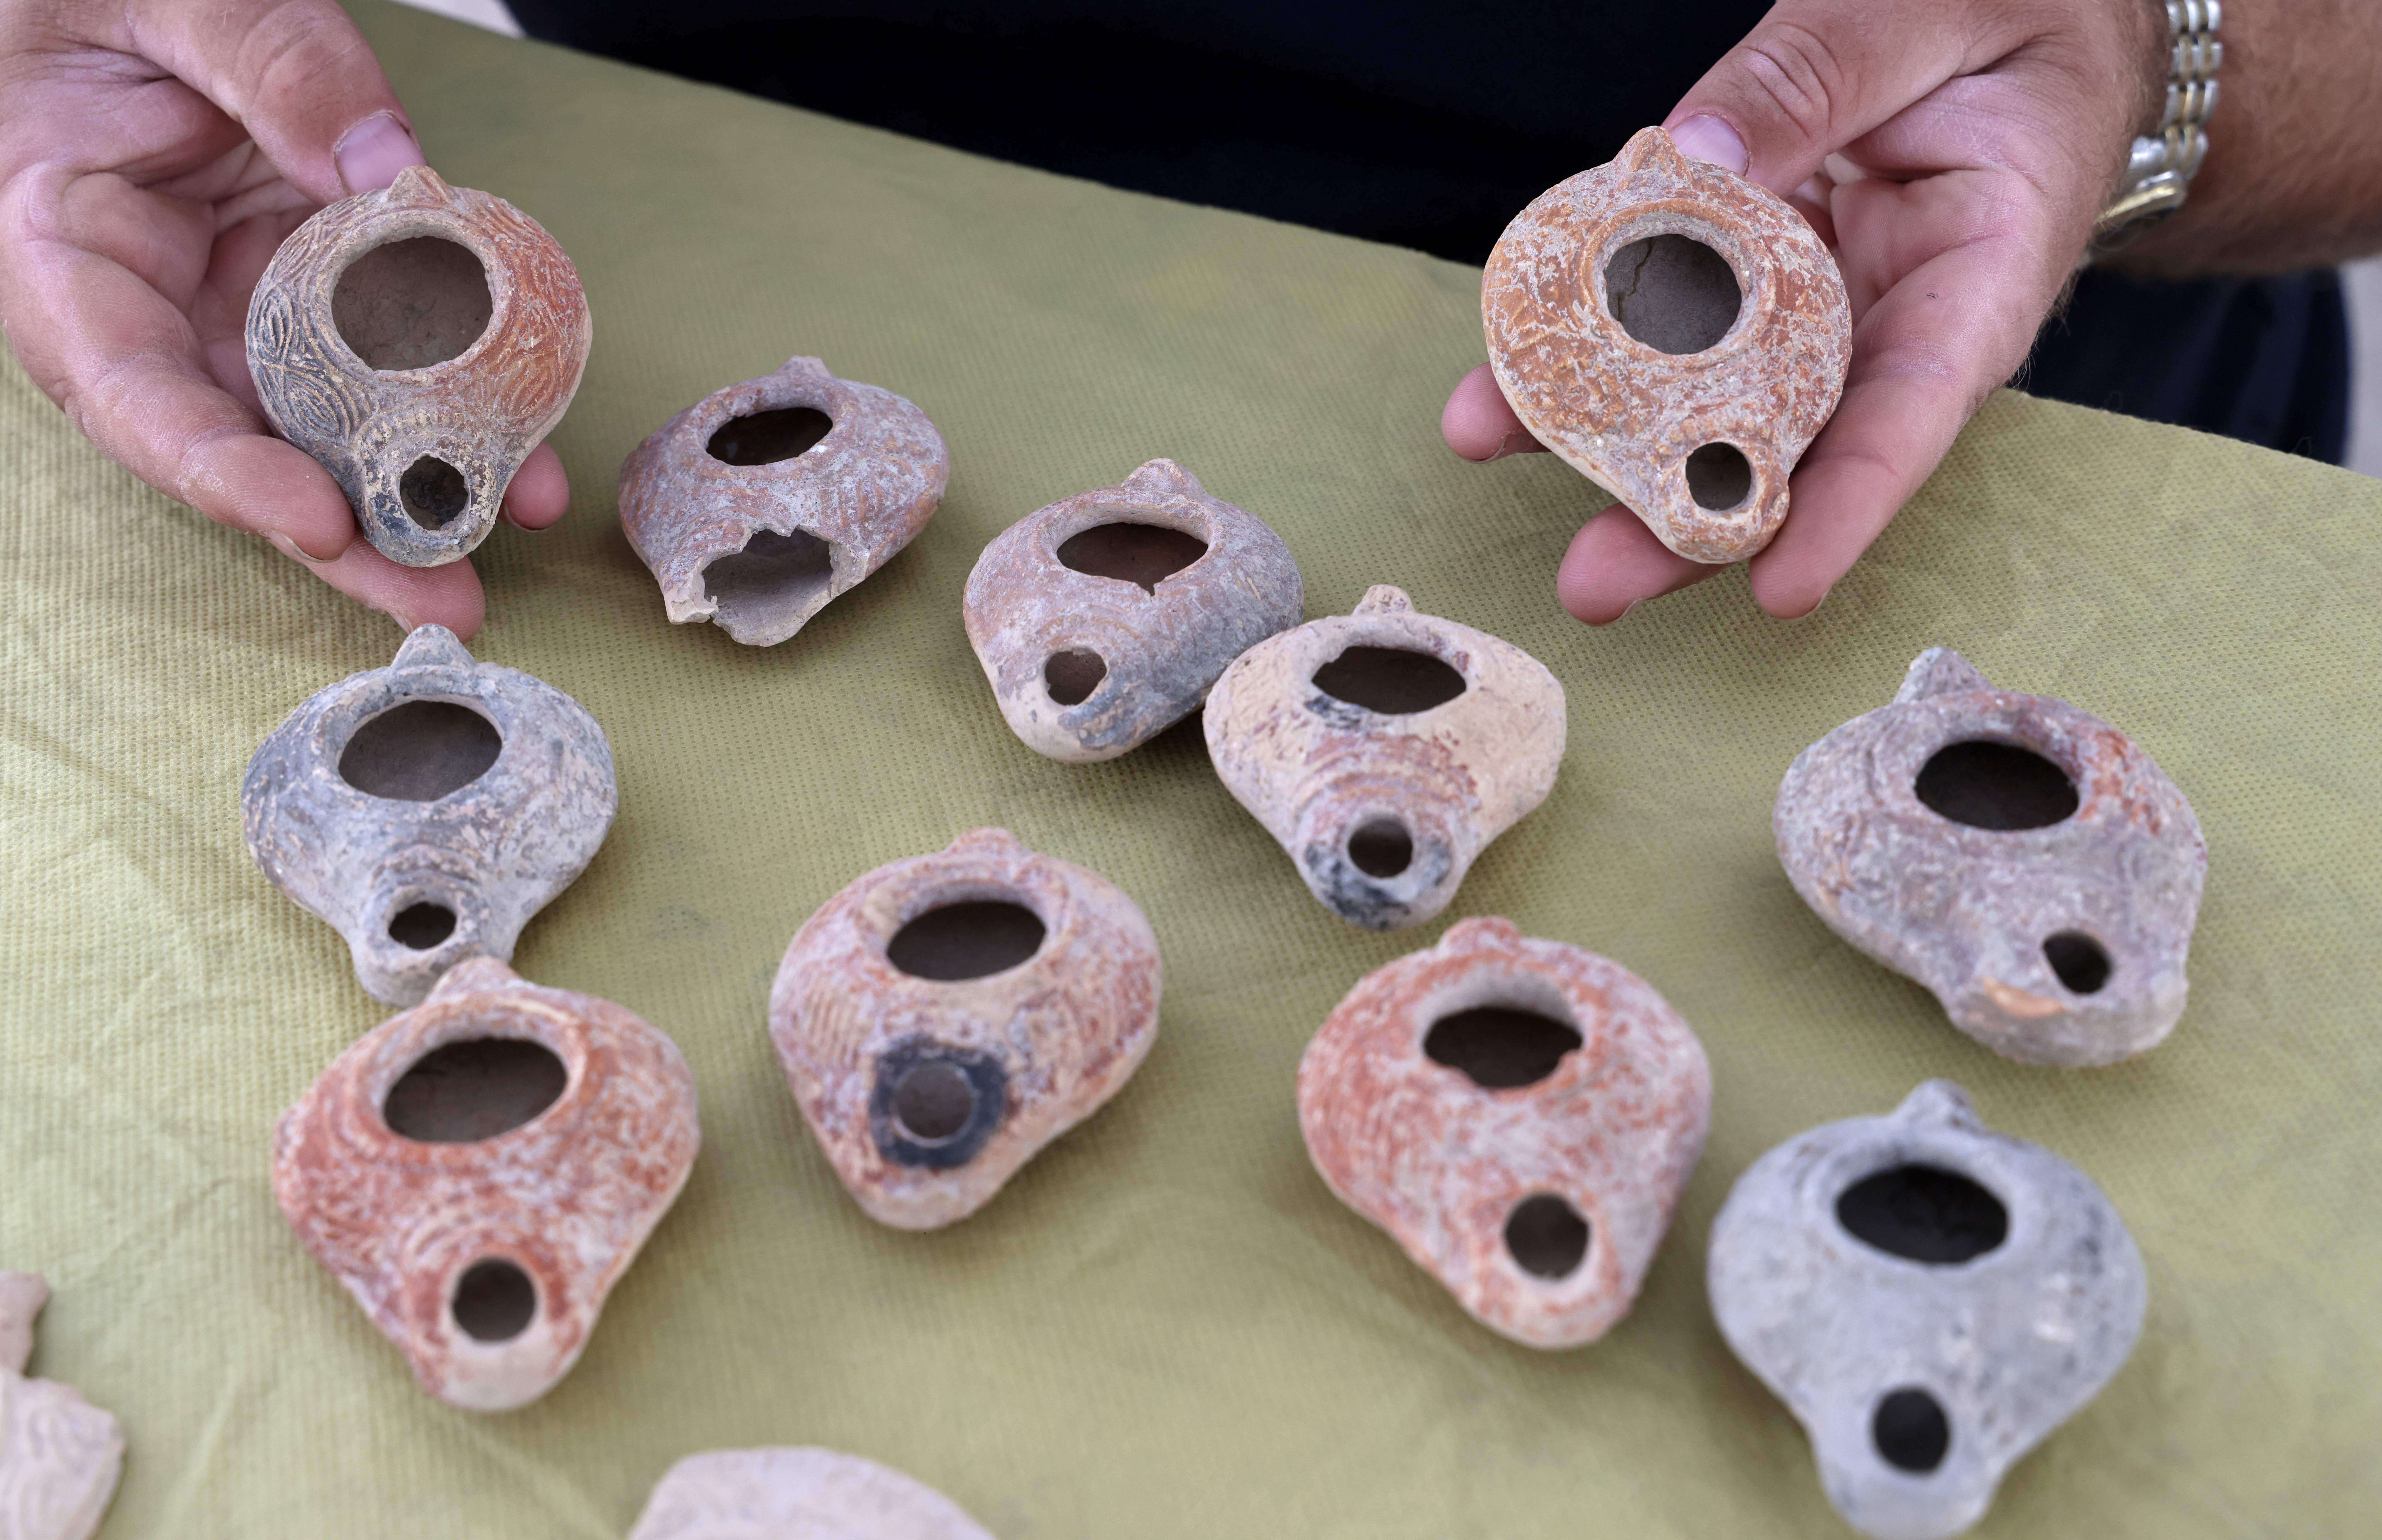 Ceramic oil lamps unearthed at the archaeological site in the Israeli city of Bet Shemesh, in 2020.